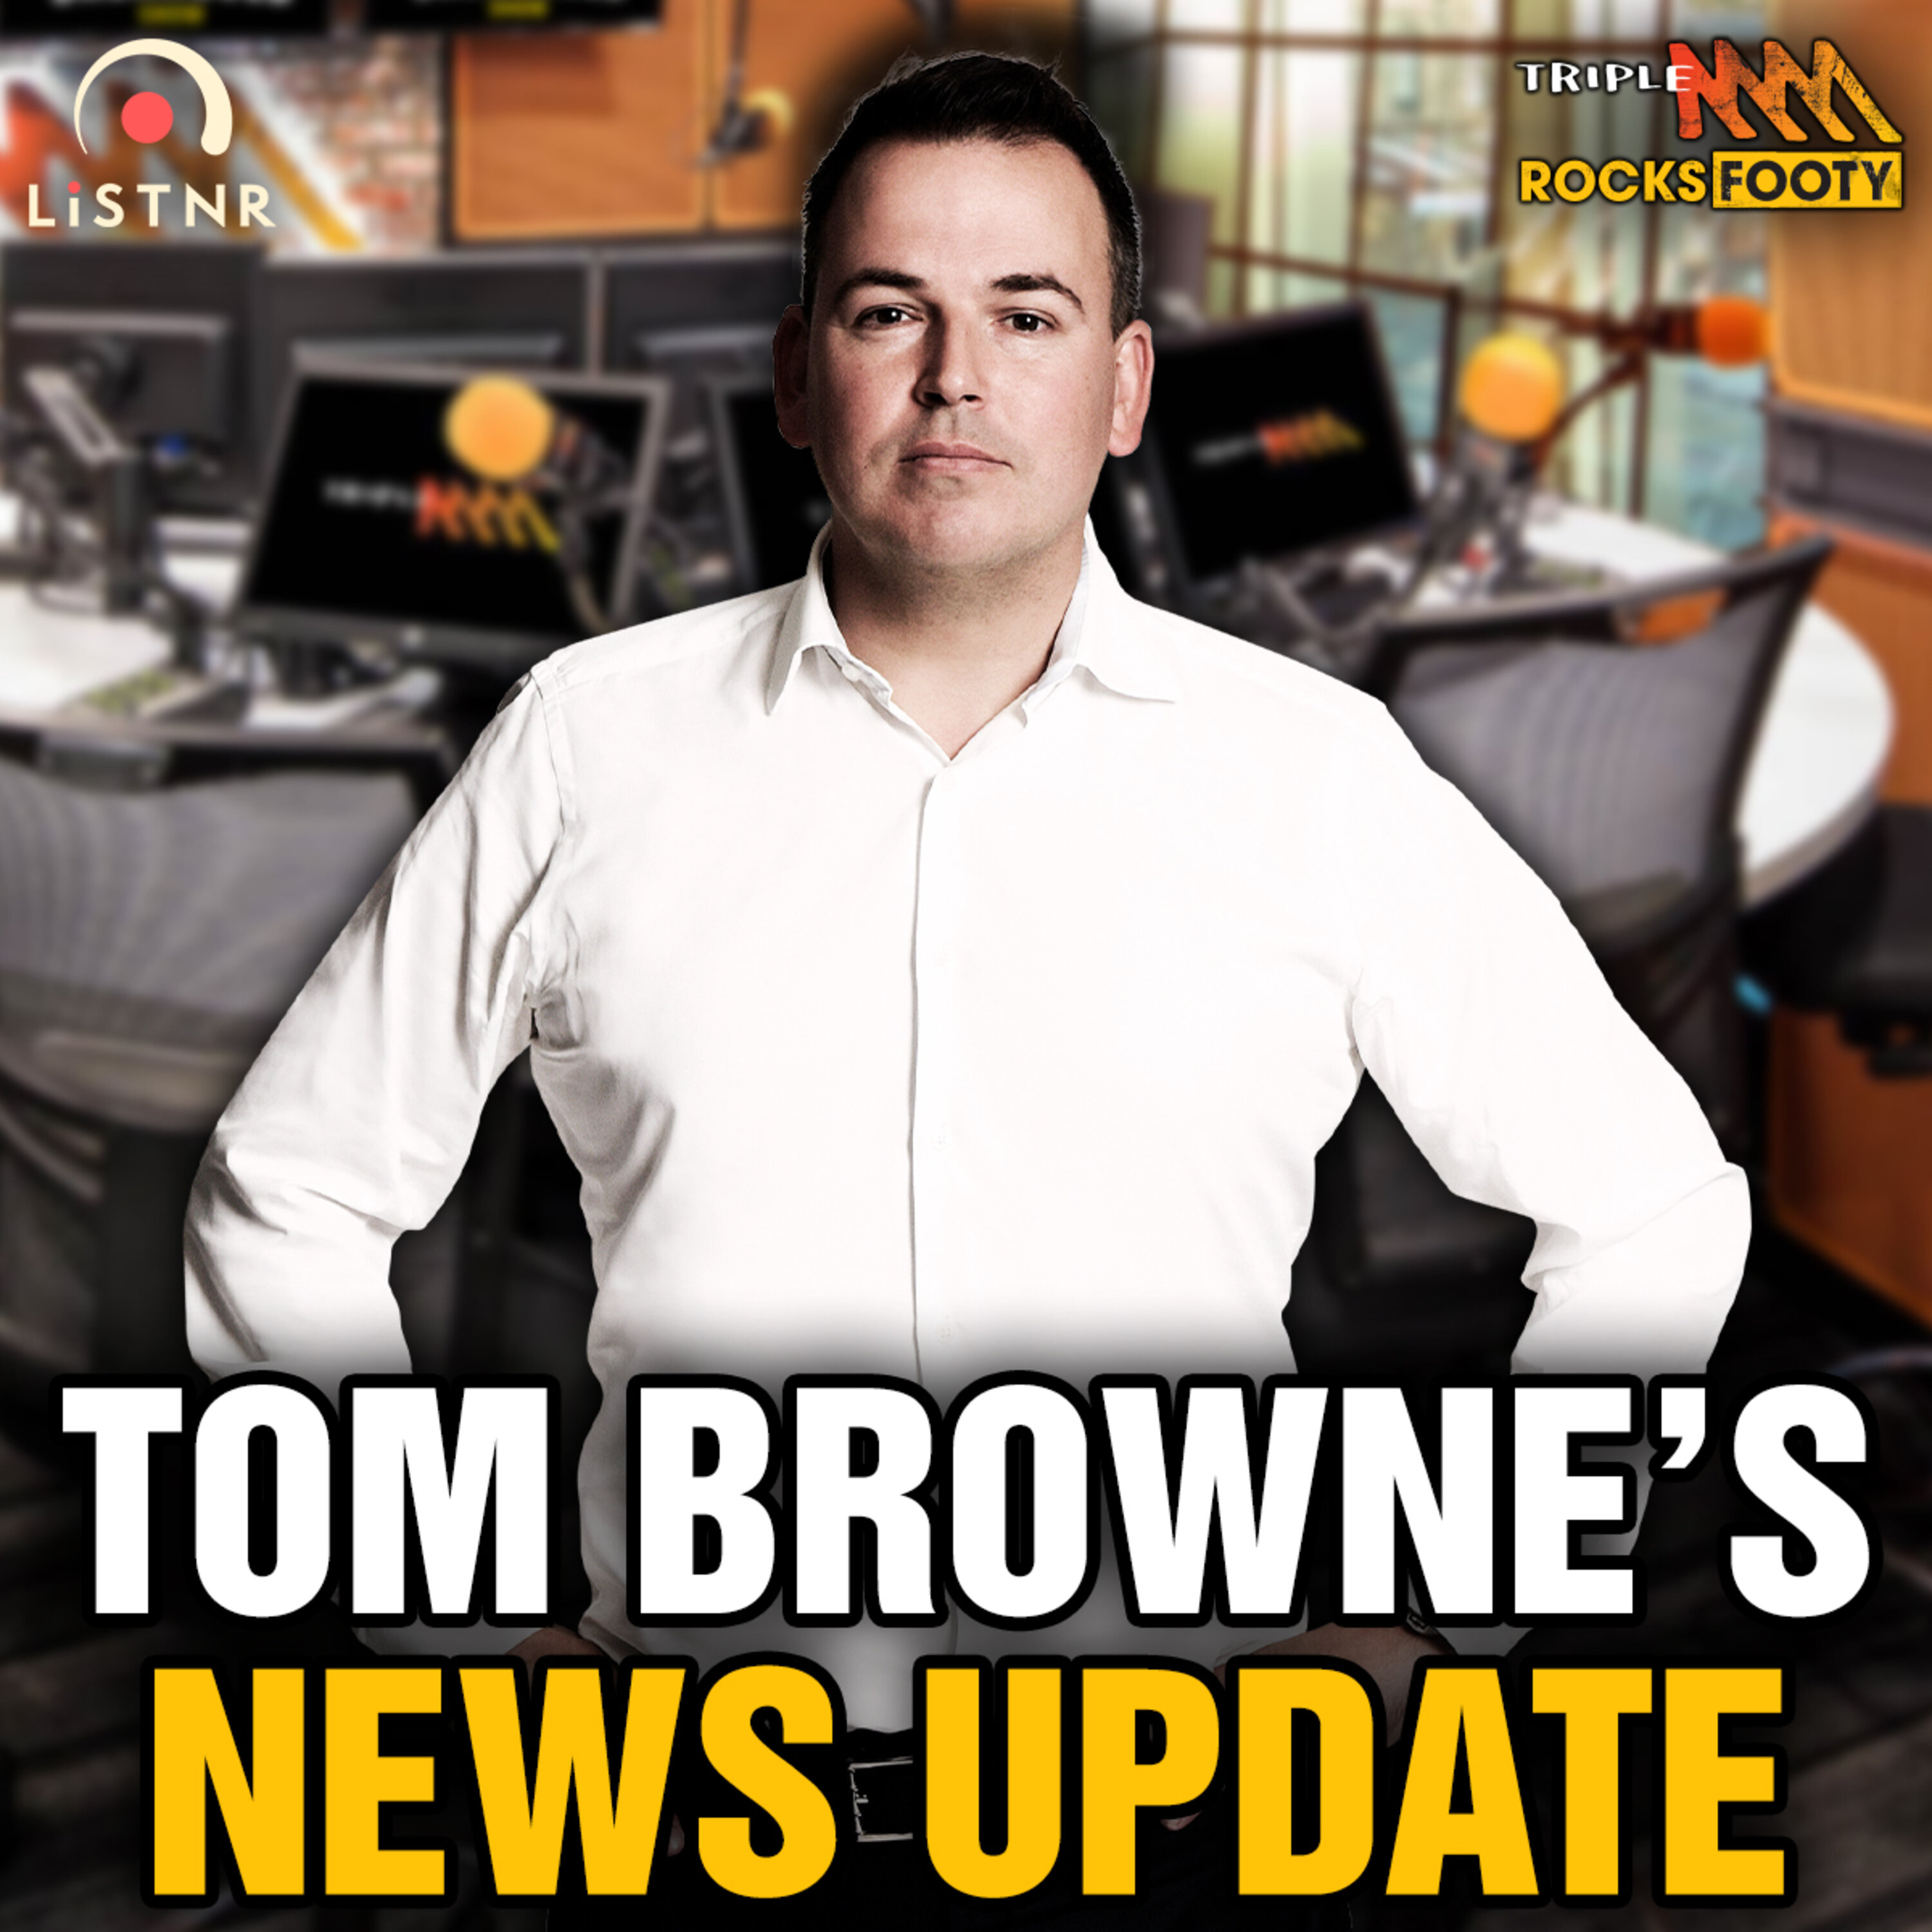 Tom Browne's News | Max Gawn on Brayden Maynard's visit to Angus Brayshaw, off-field changes at Essendon imminent, Dusty's staying at Richmond